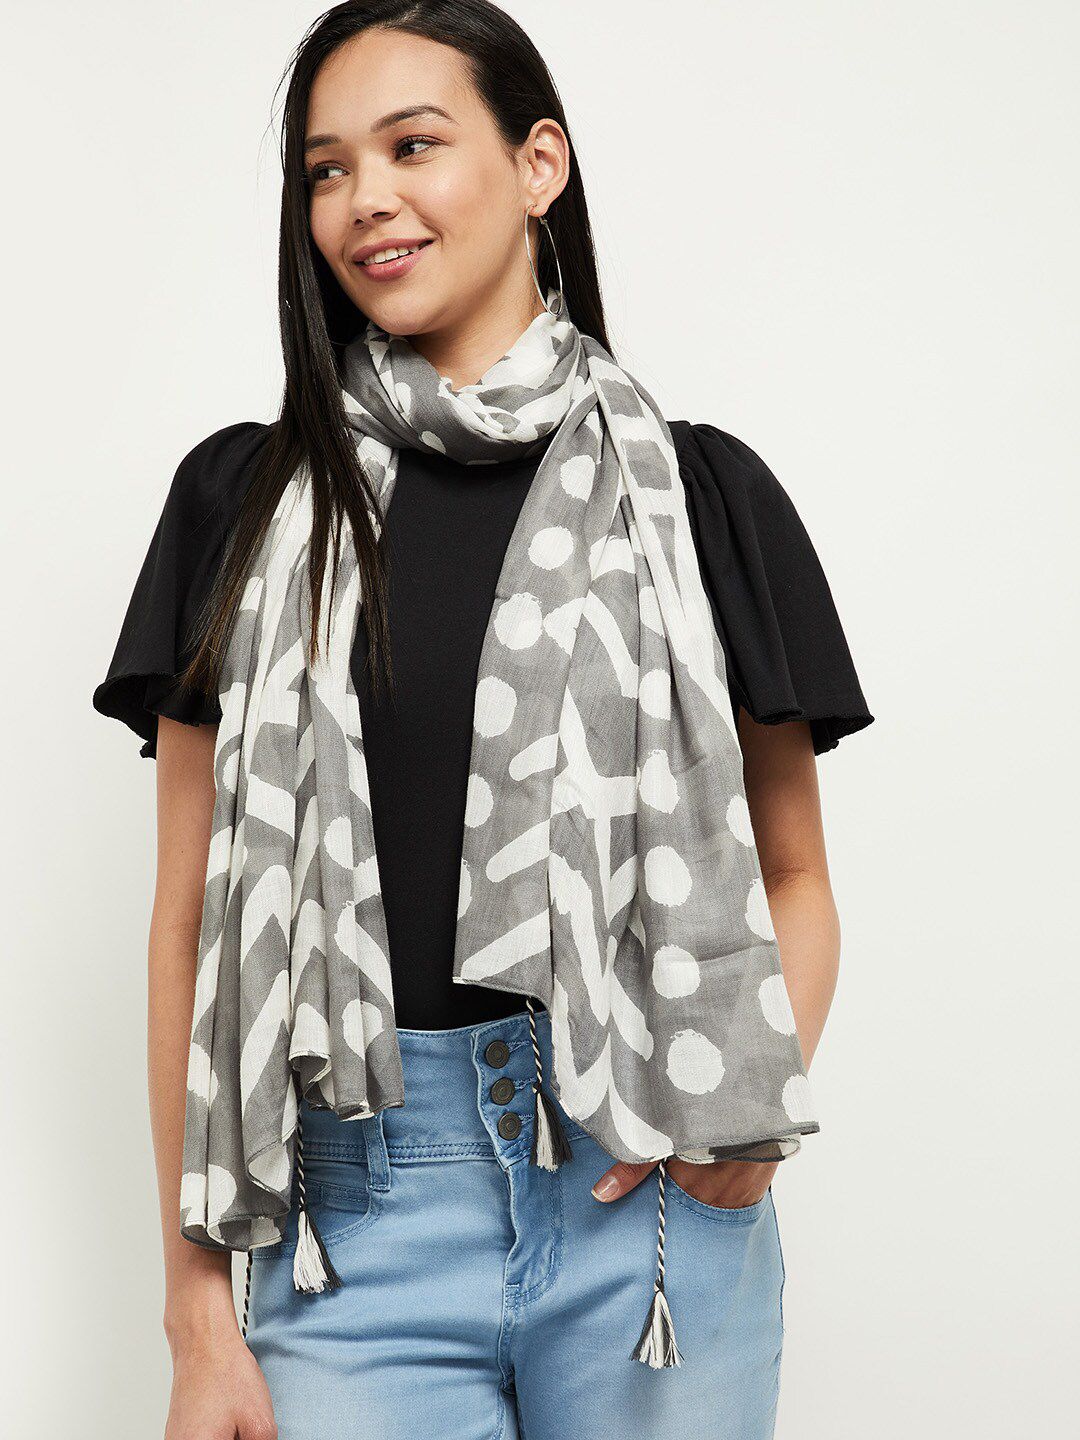 max Women Grey & White Printed Tasselled Scarf Price in India